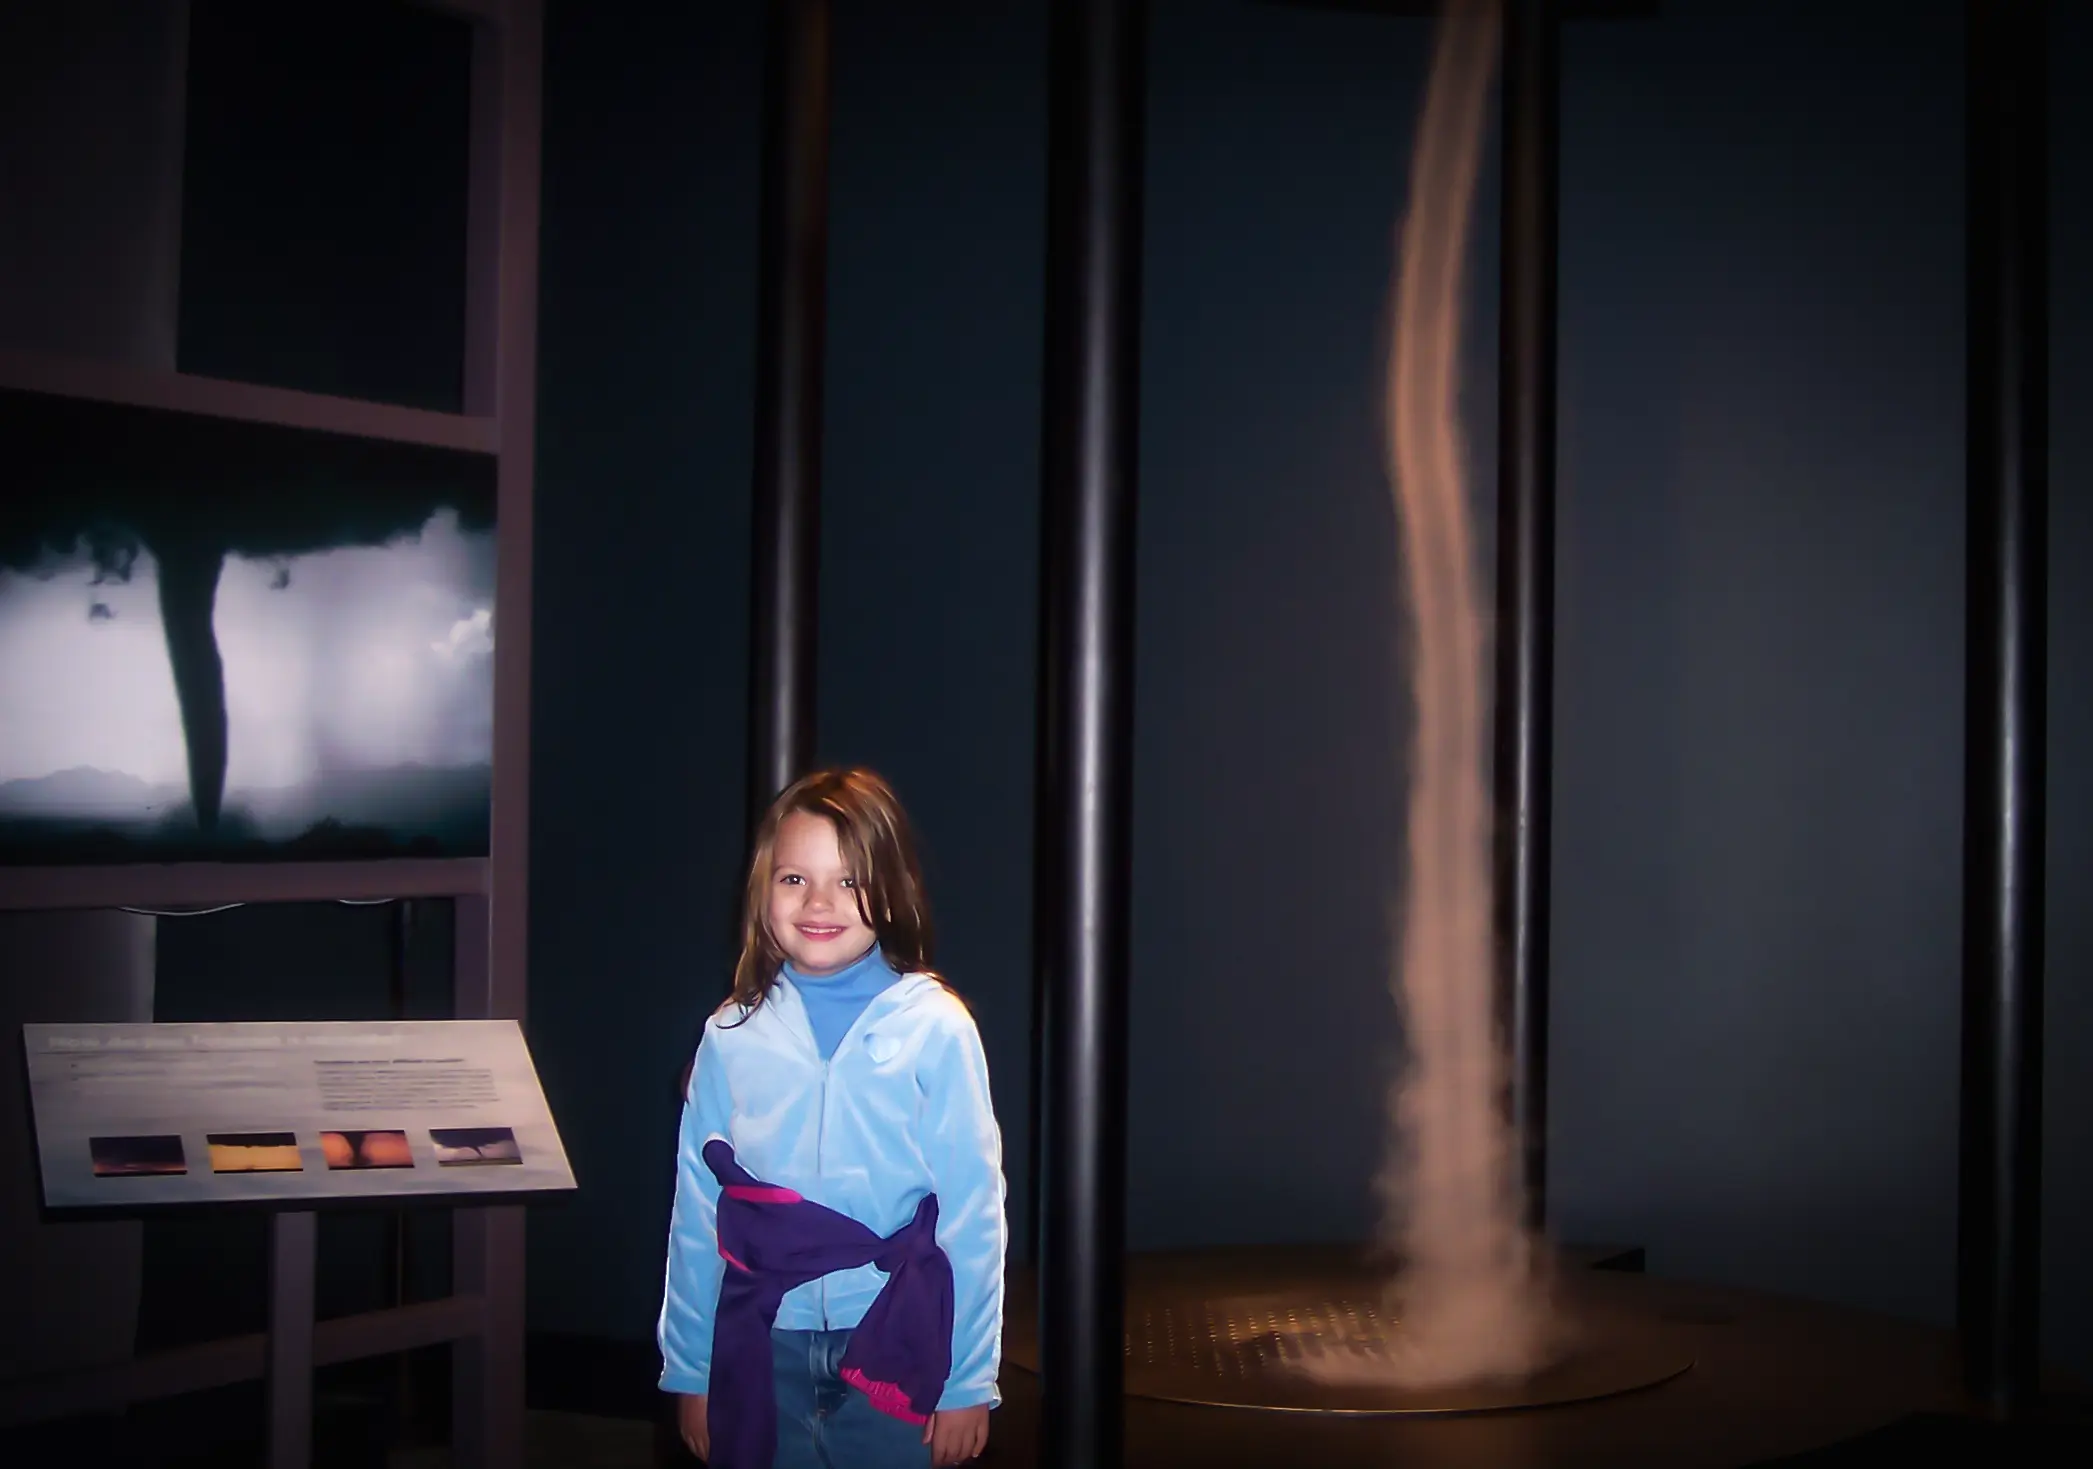 katie standing at a tornado display at the maryland science center